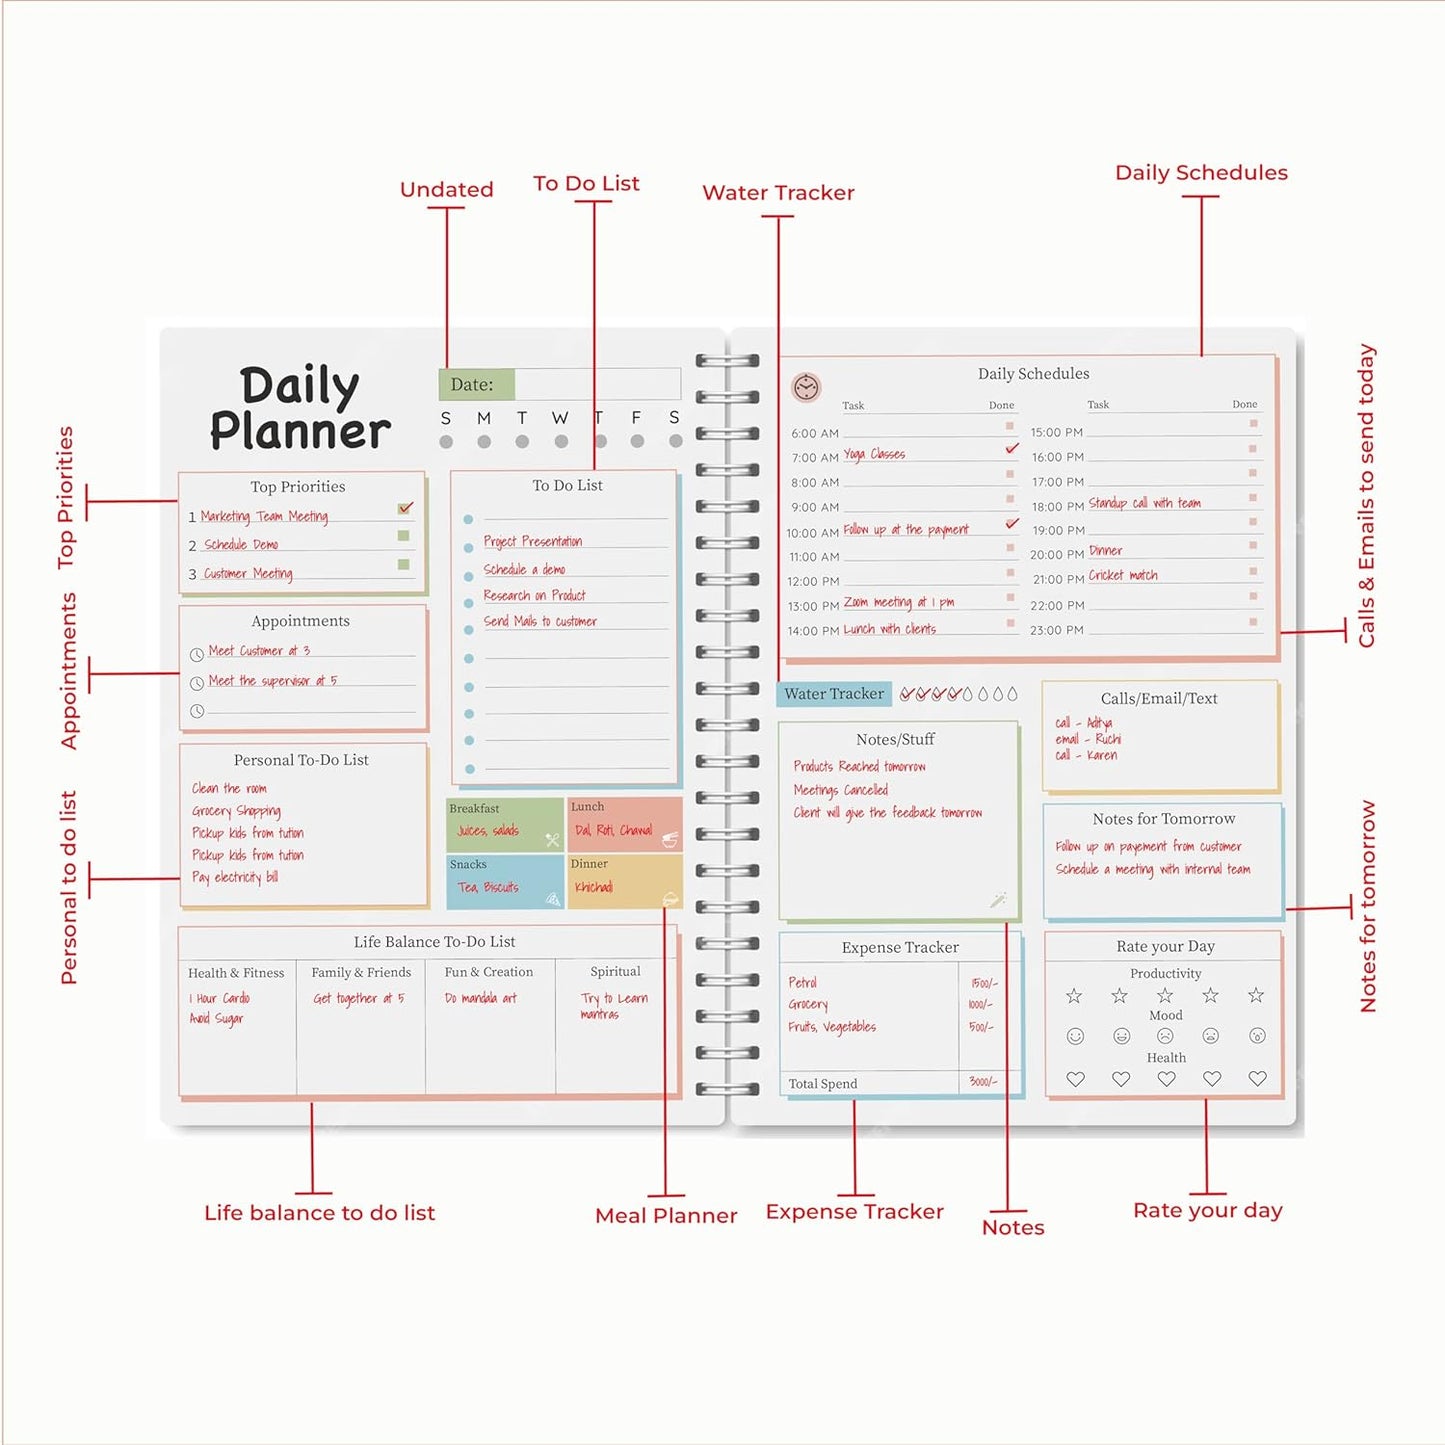 Blossom- Daily Planner